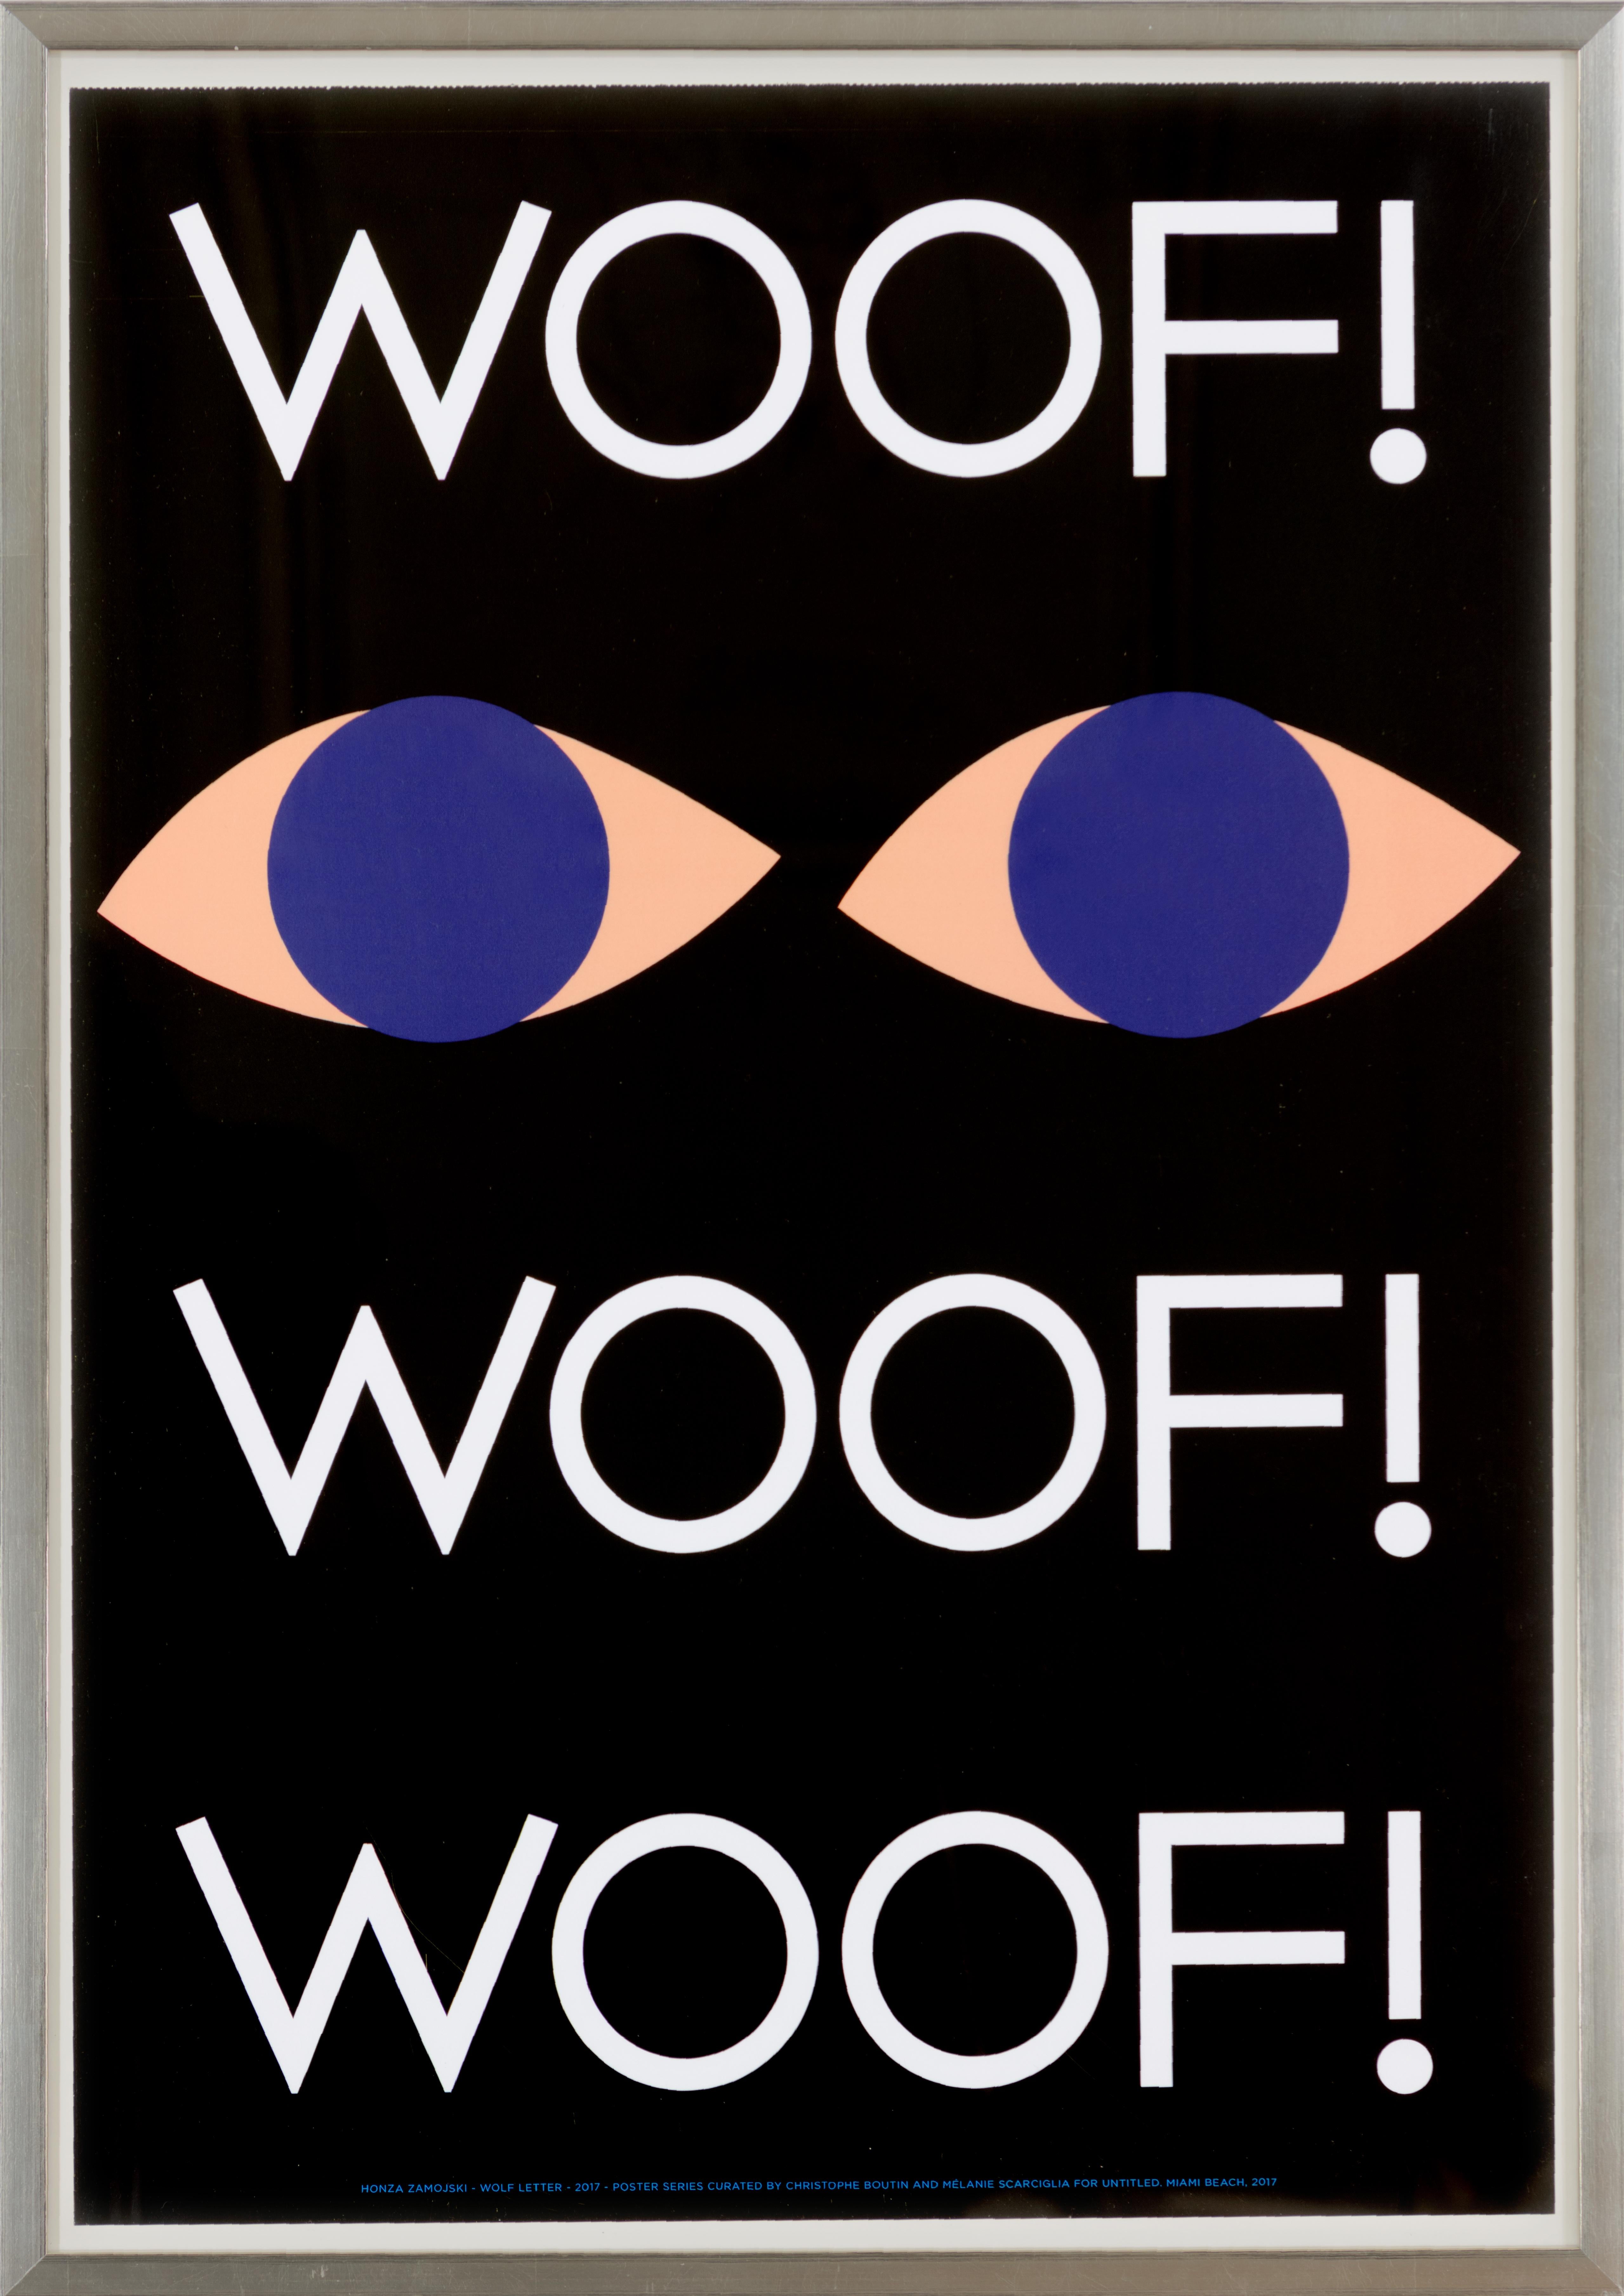 Honza Zamojski Print - 'Wolf Letter' Poster Series Curated by Christophe Boutin and Mélanie Scarciglia